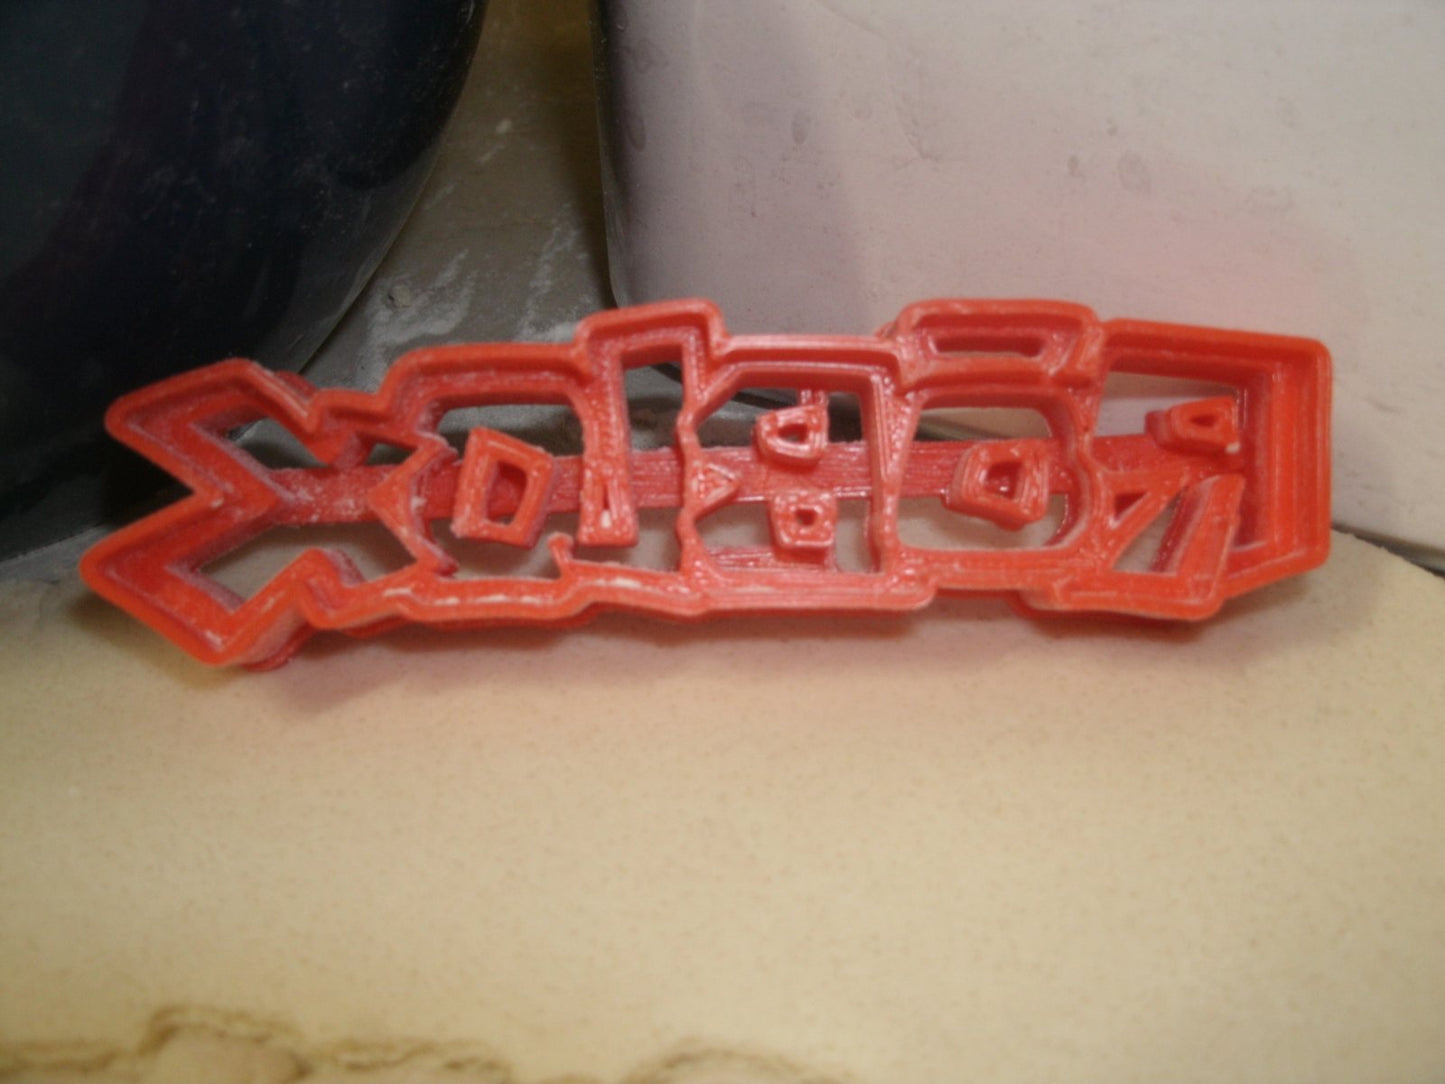 Roblox Letters Online Video Game Cookie Cutter Made in USA PR726